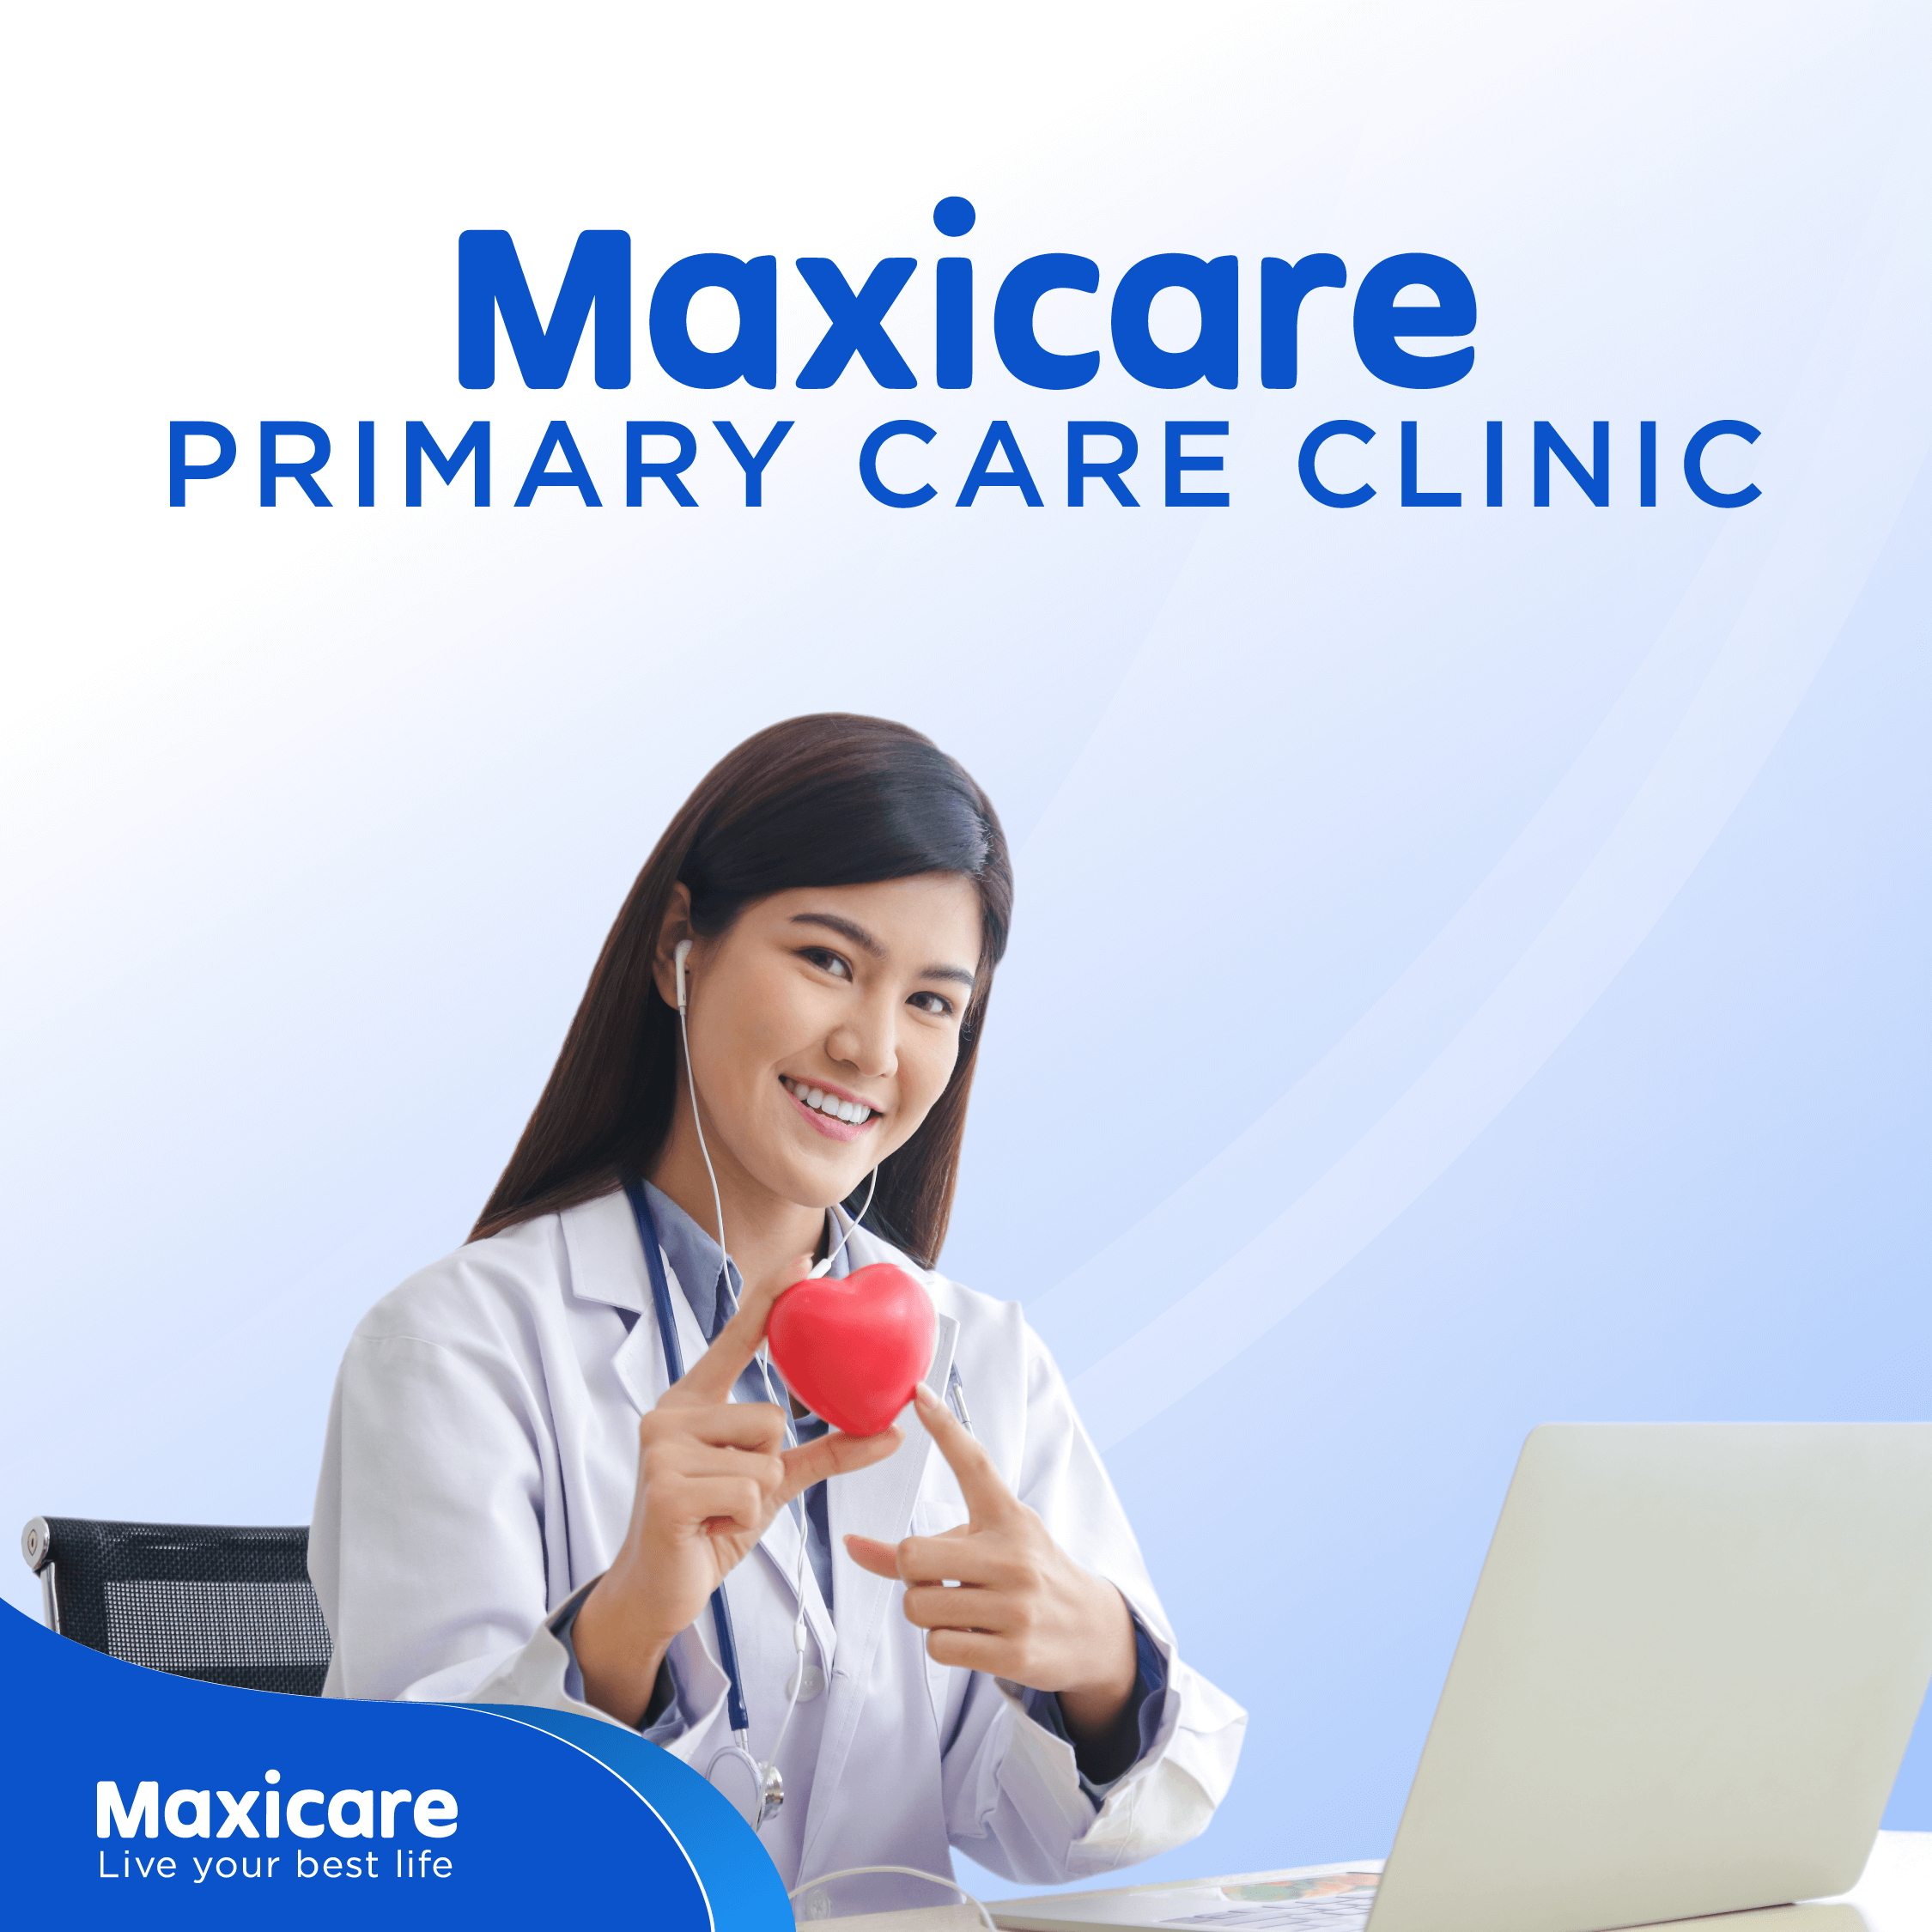 Consult with a cardiologist in selected Maxicare Primary Care Clinics